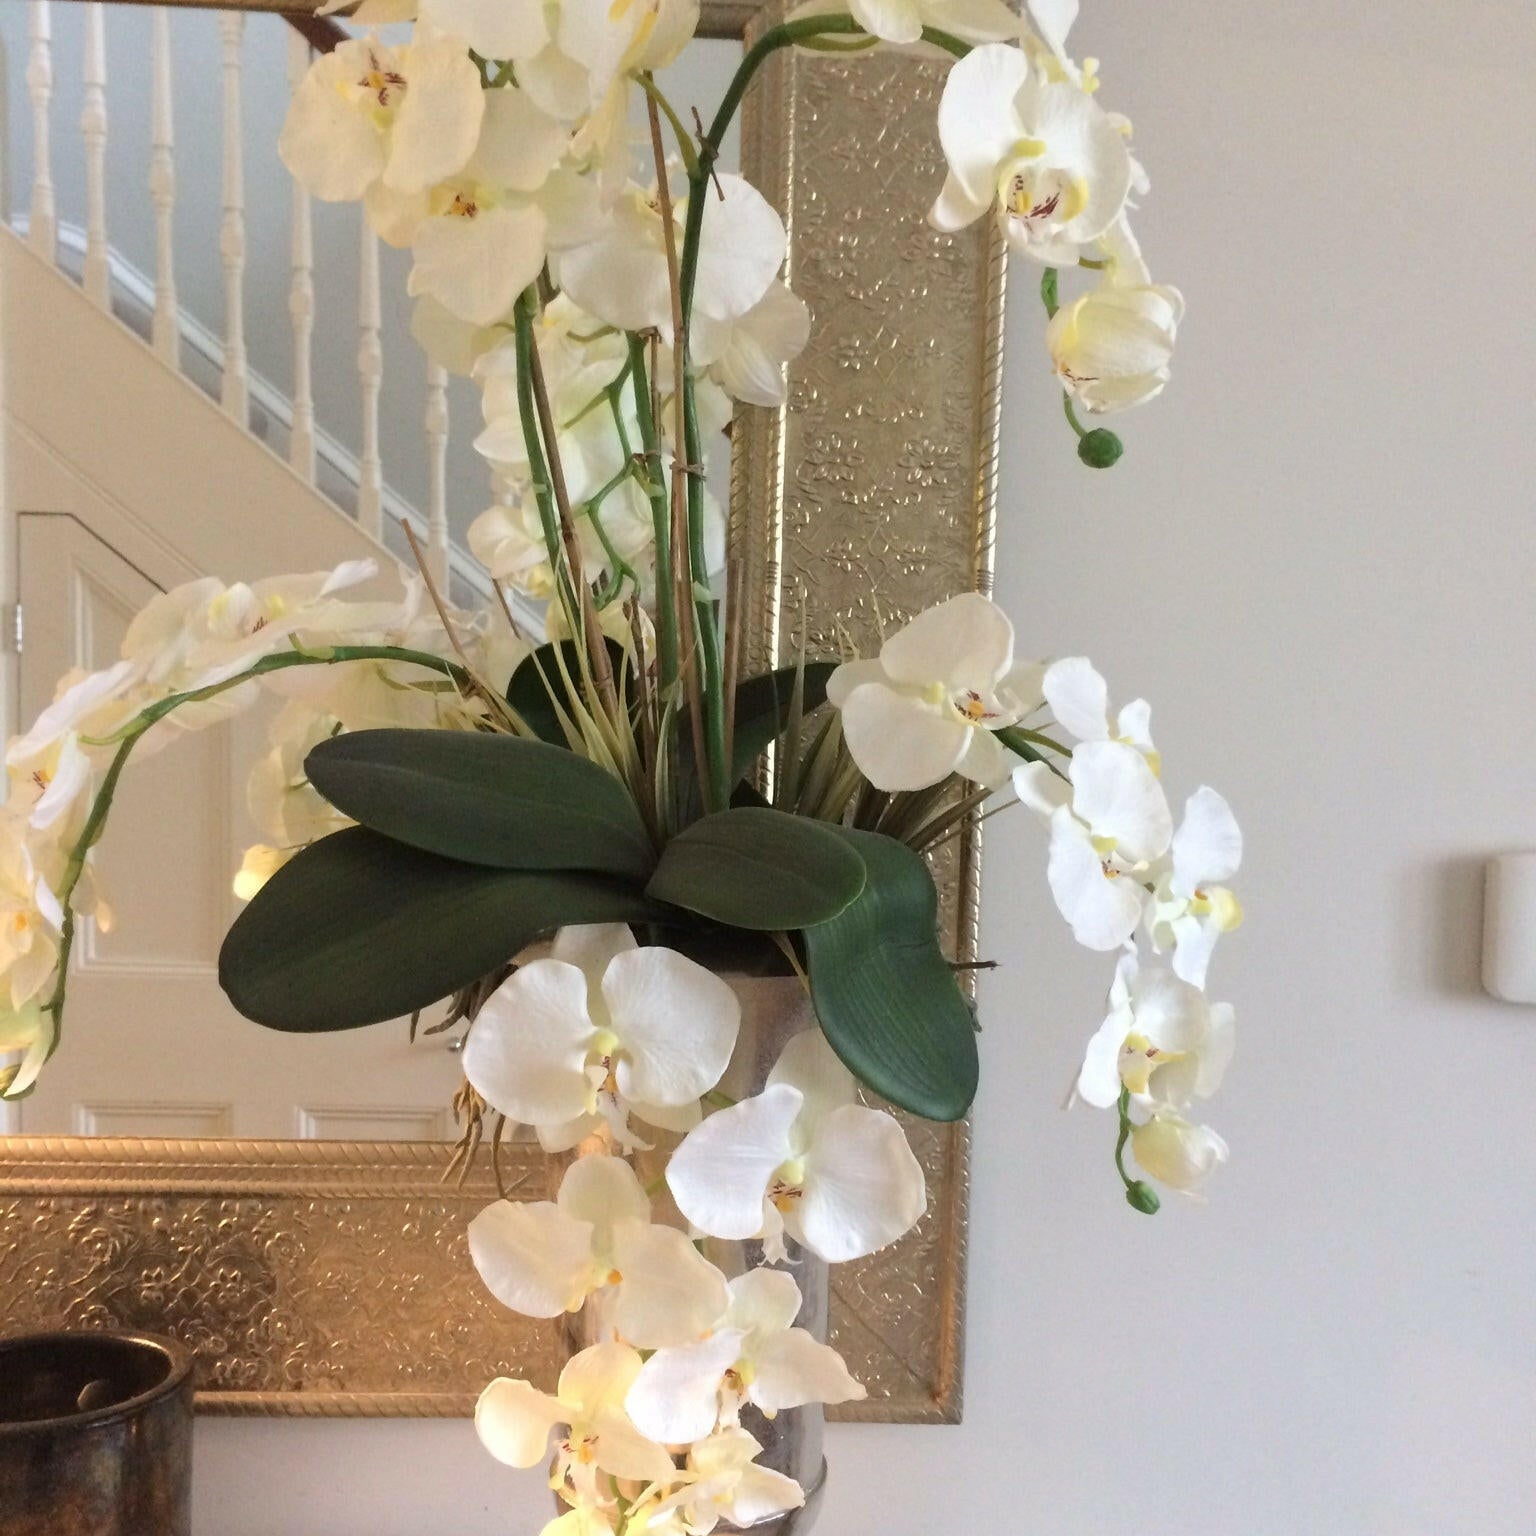 Showing a Bespoke artificial Silk flower arrangement, including the Phalaenopsis, sent in by one of our customers